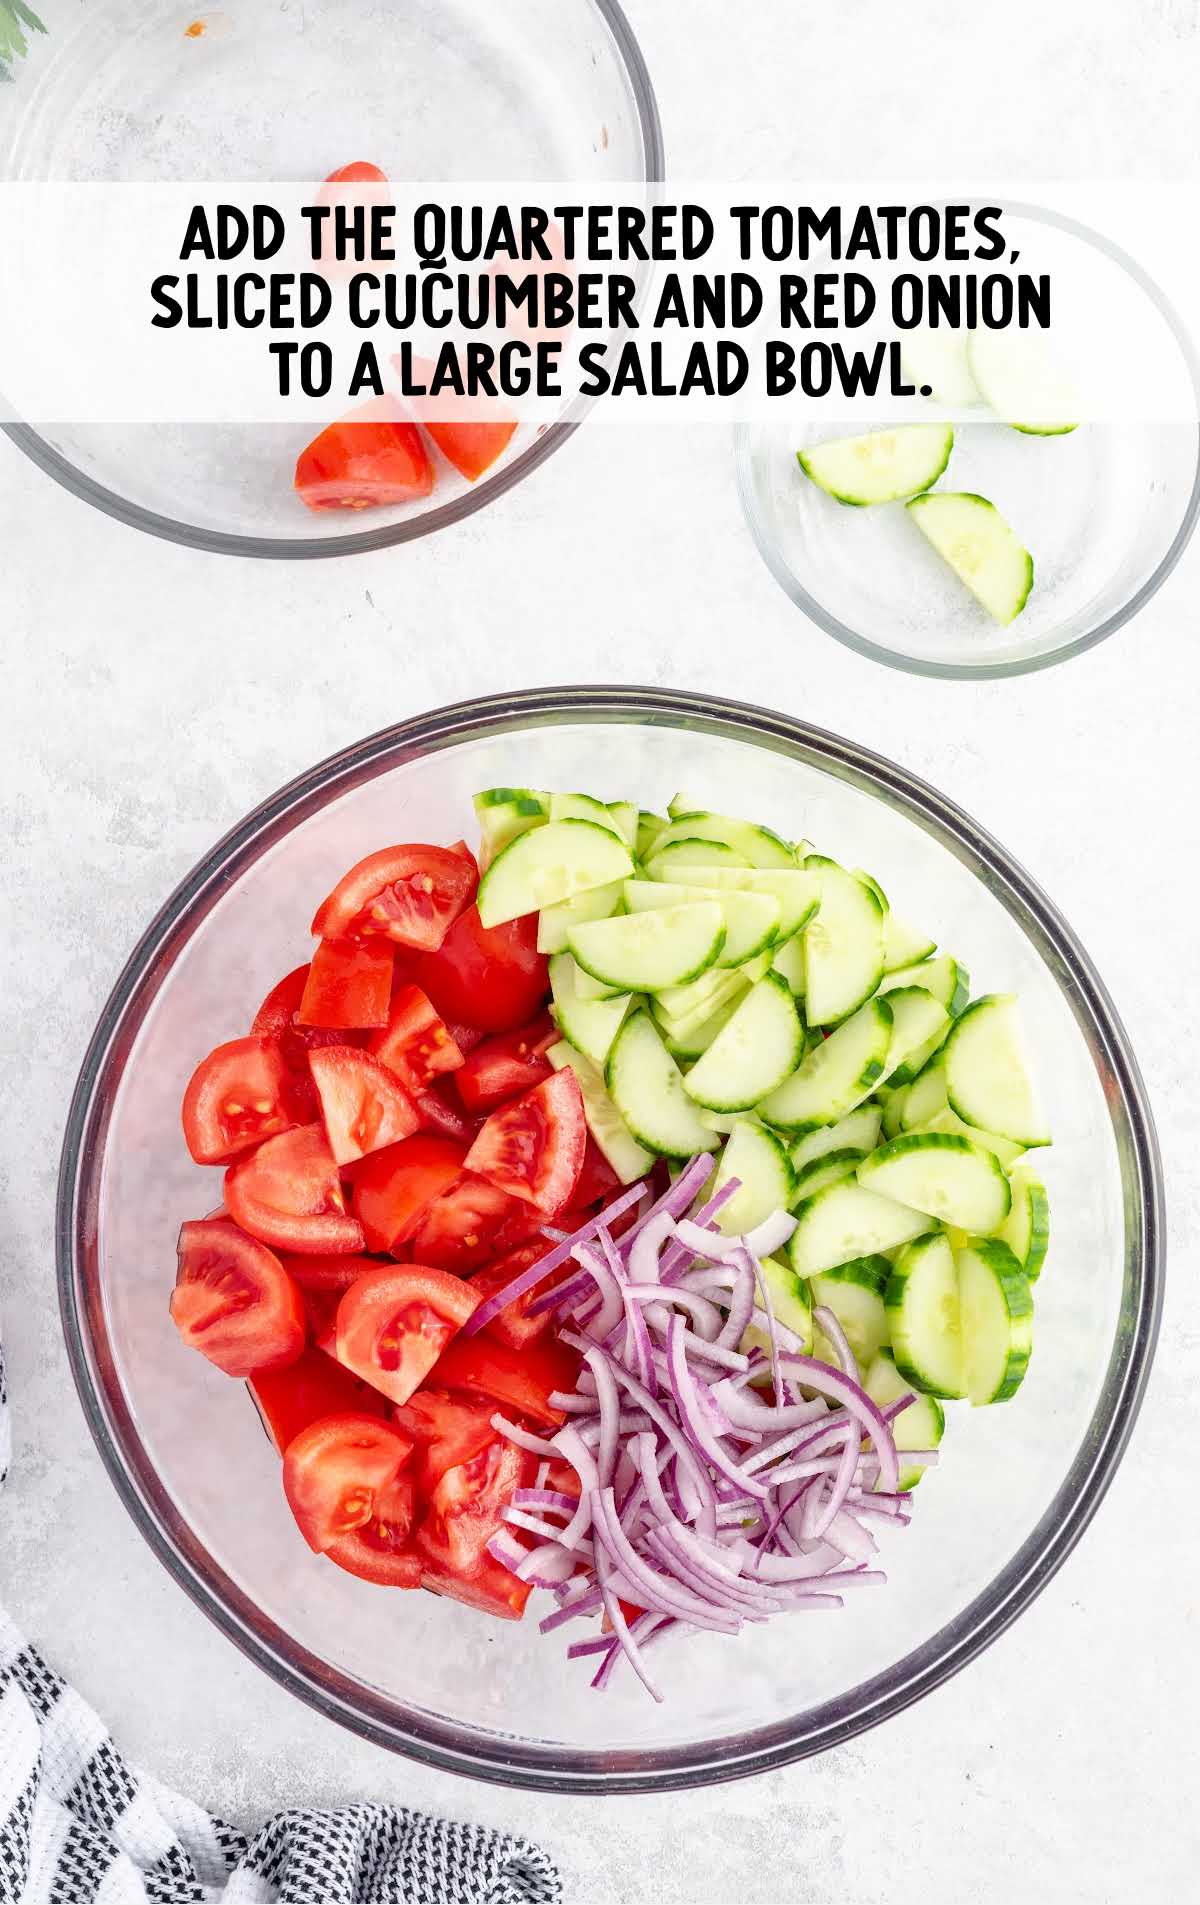 tomatoes, sliced cucumbers and red onions added to a bowl